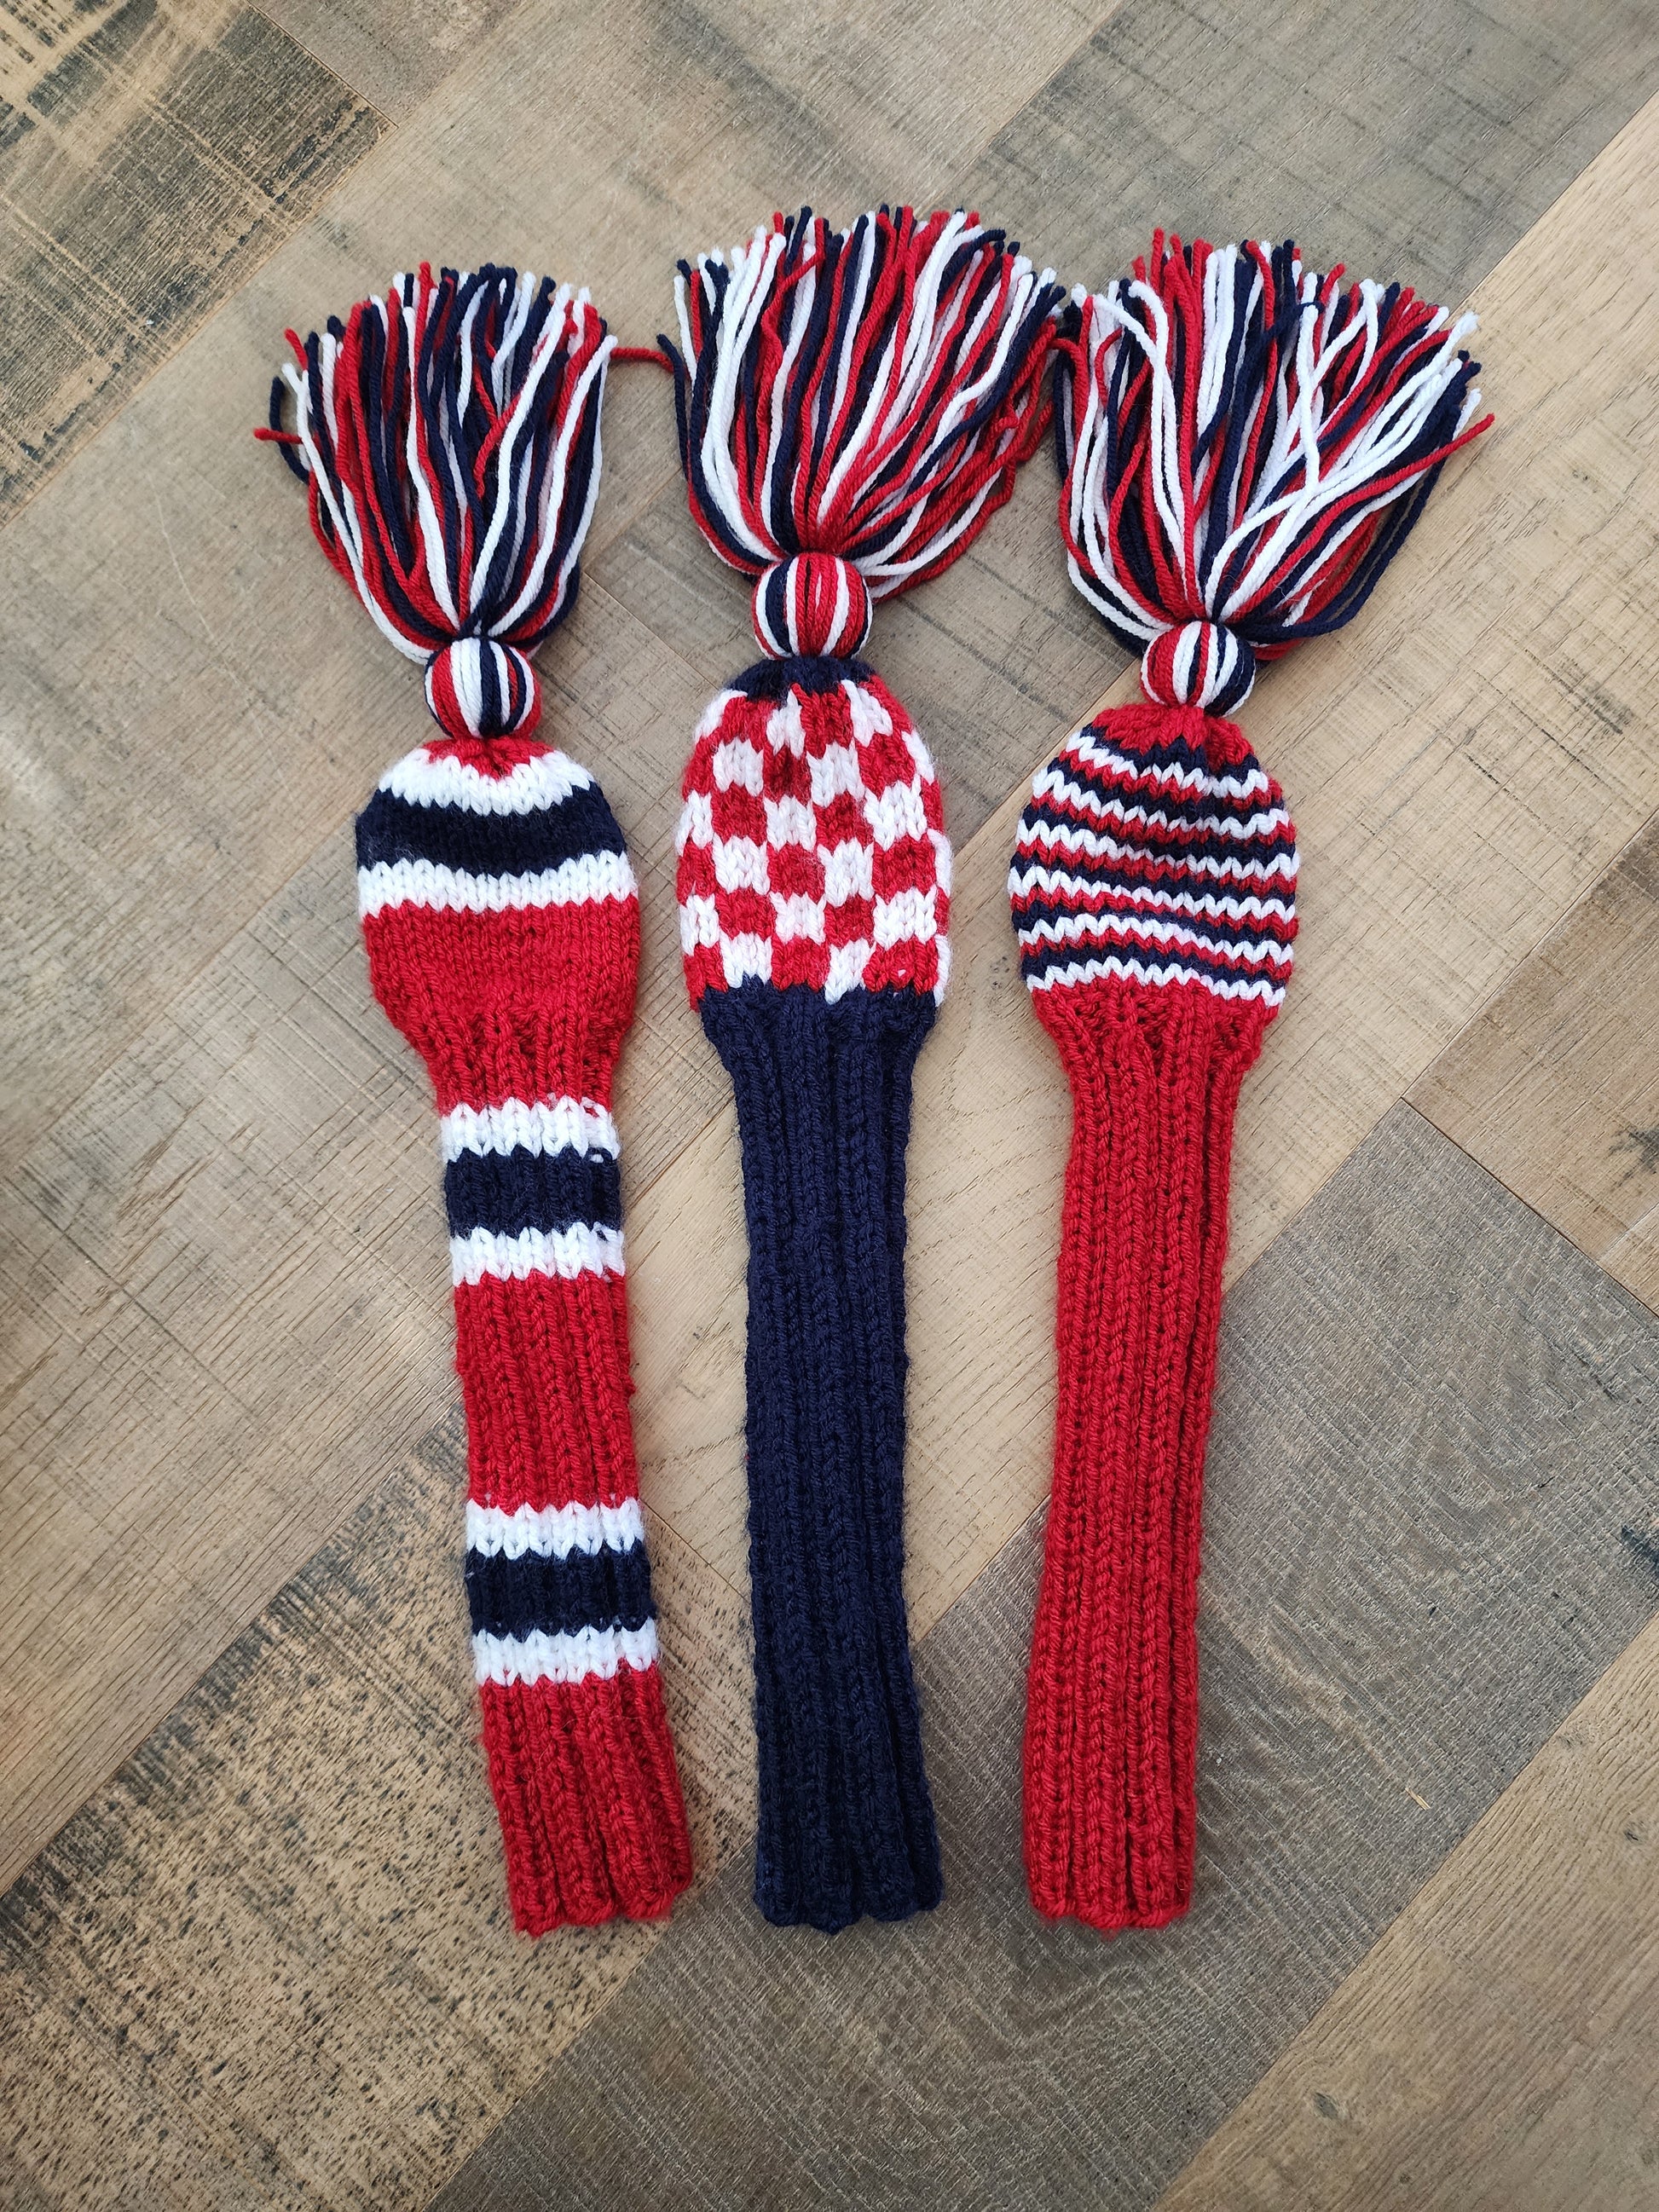 Three Golf Club Head Covers Retro-Vintage Red, White & Blue with Tassels for Fairway Woods - Austinknittylimits